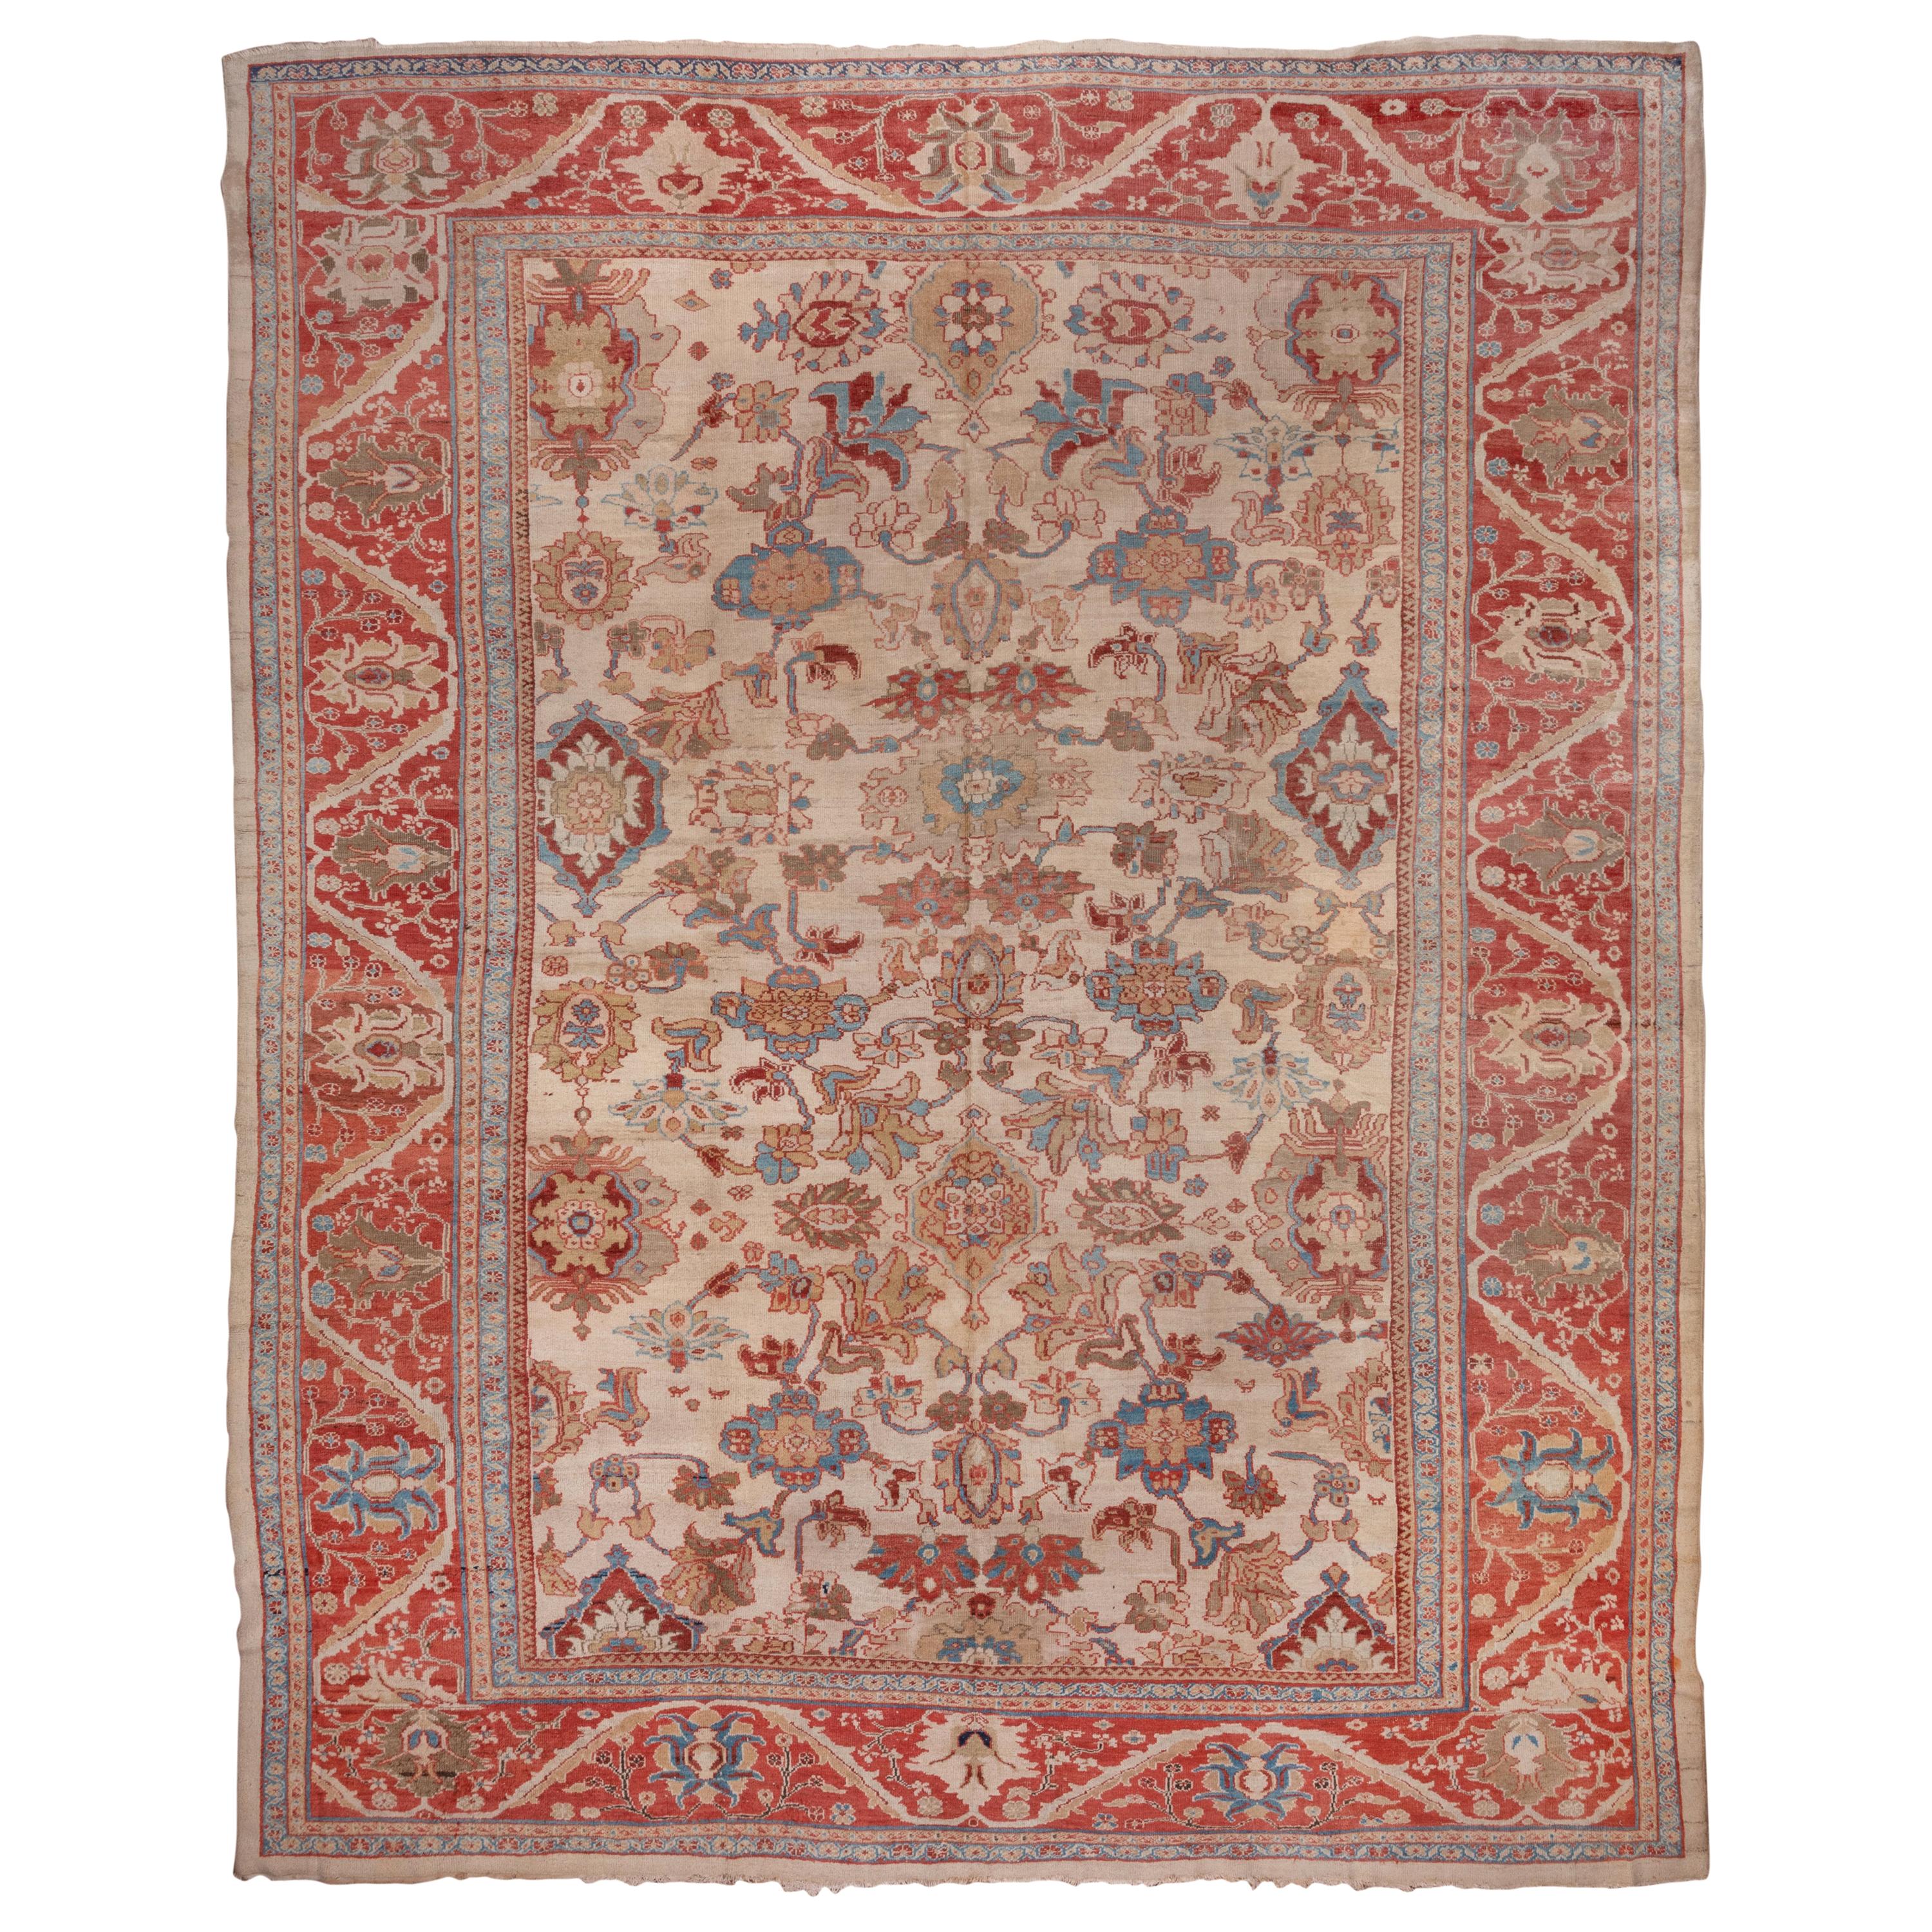 Antique Sultanabad Carpet All-Over Field, Cream Field, Bright Red & Blue Borders For Sale